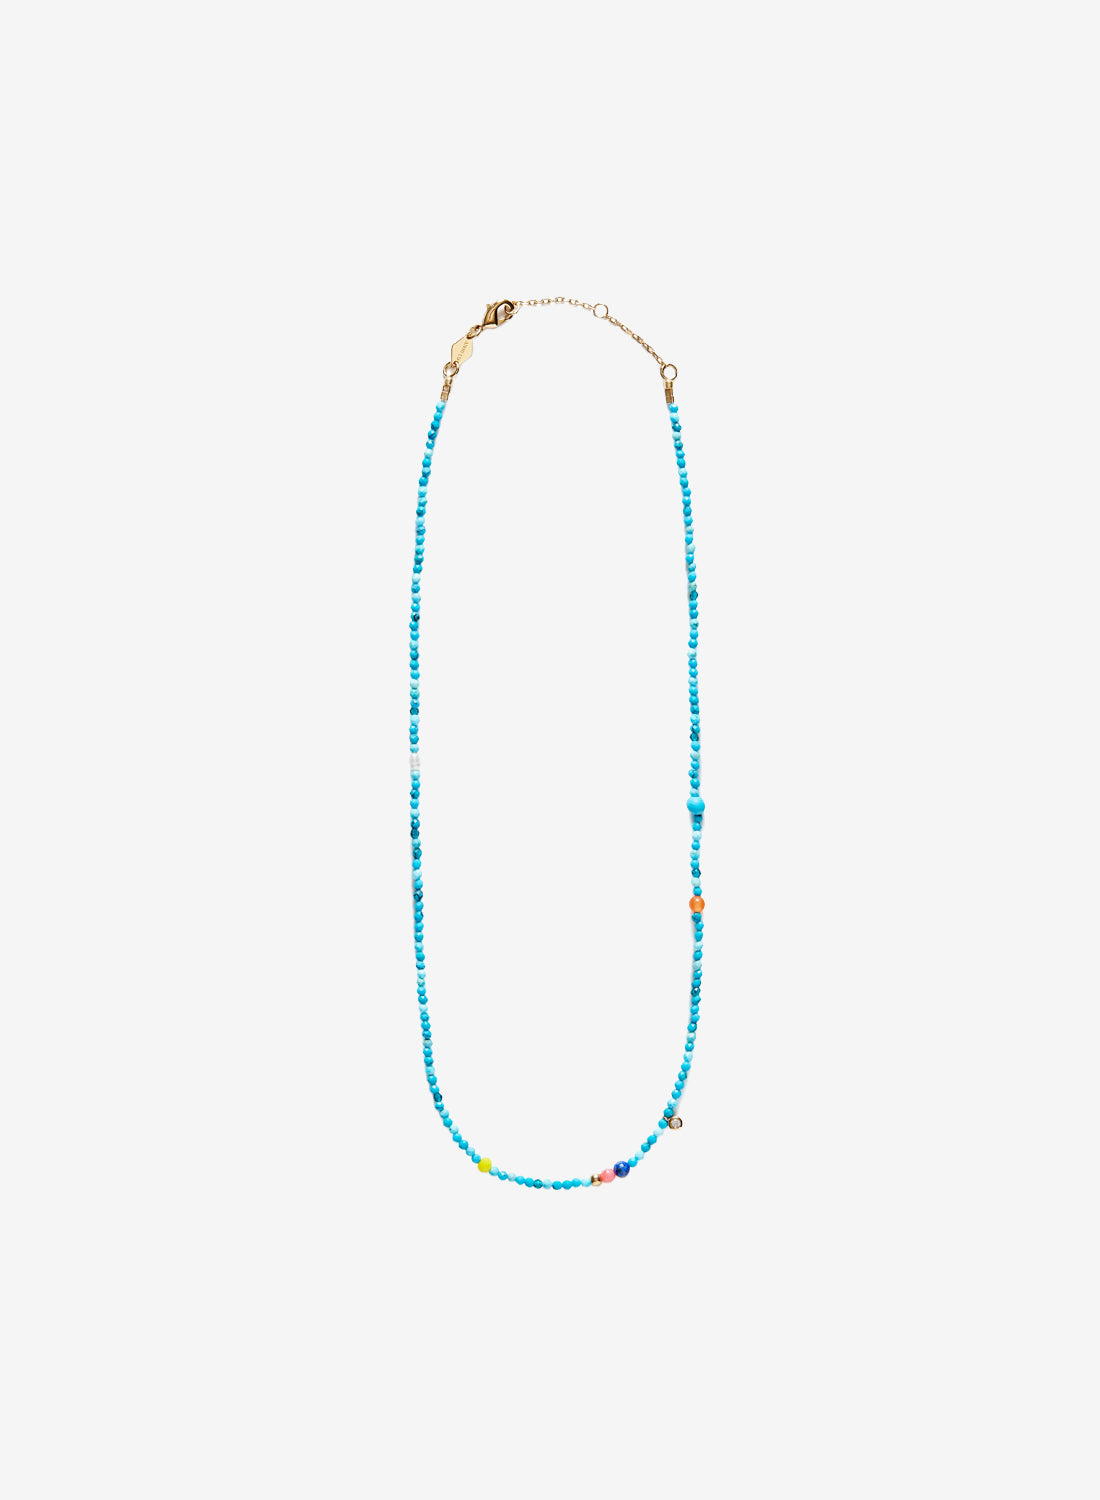 Anni Lu Dotty Necklace Turquoise